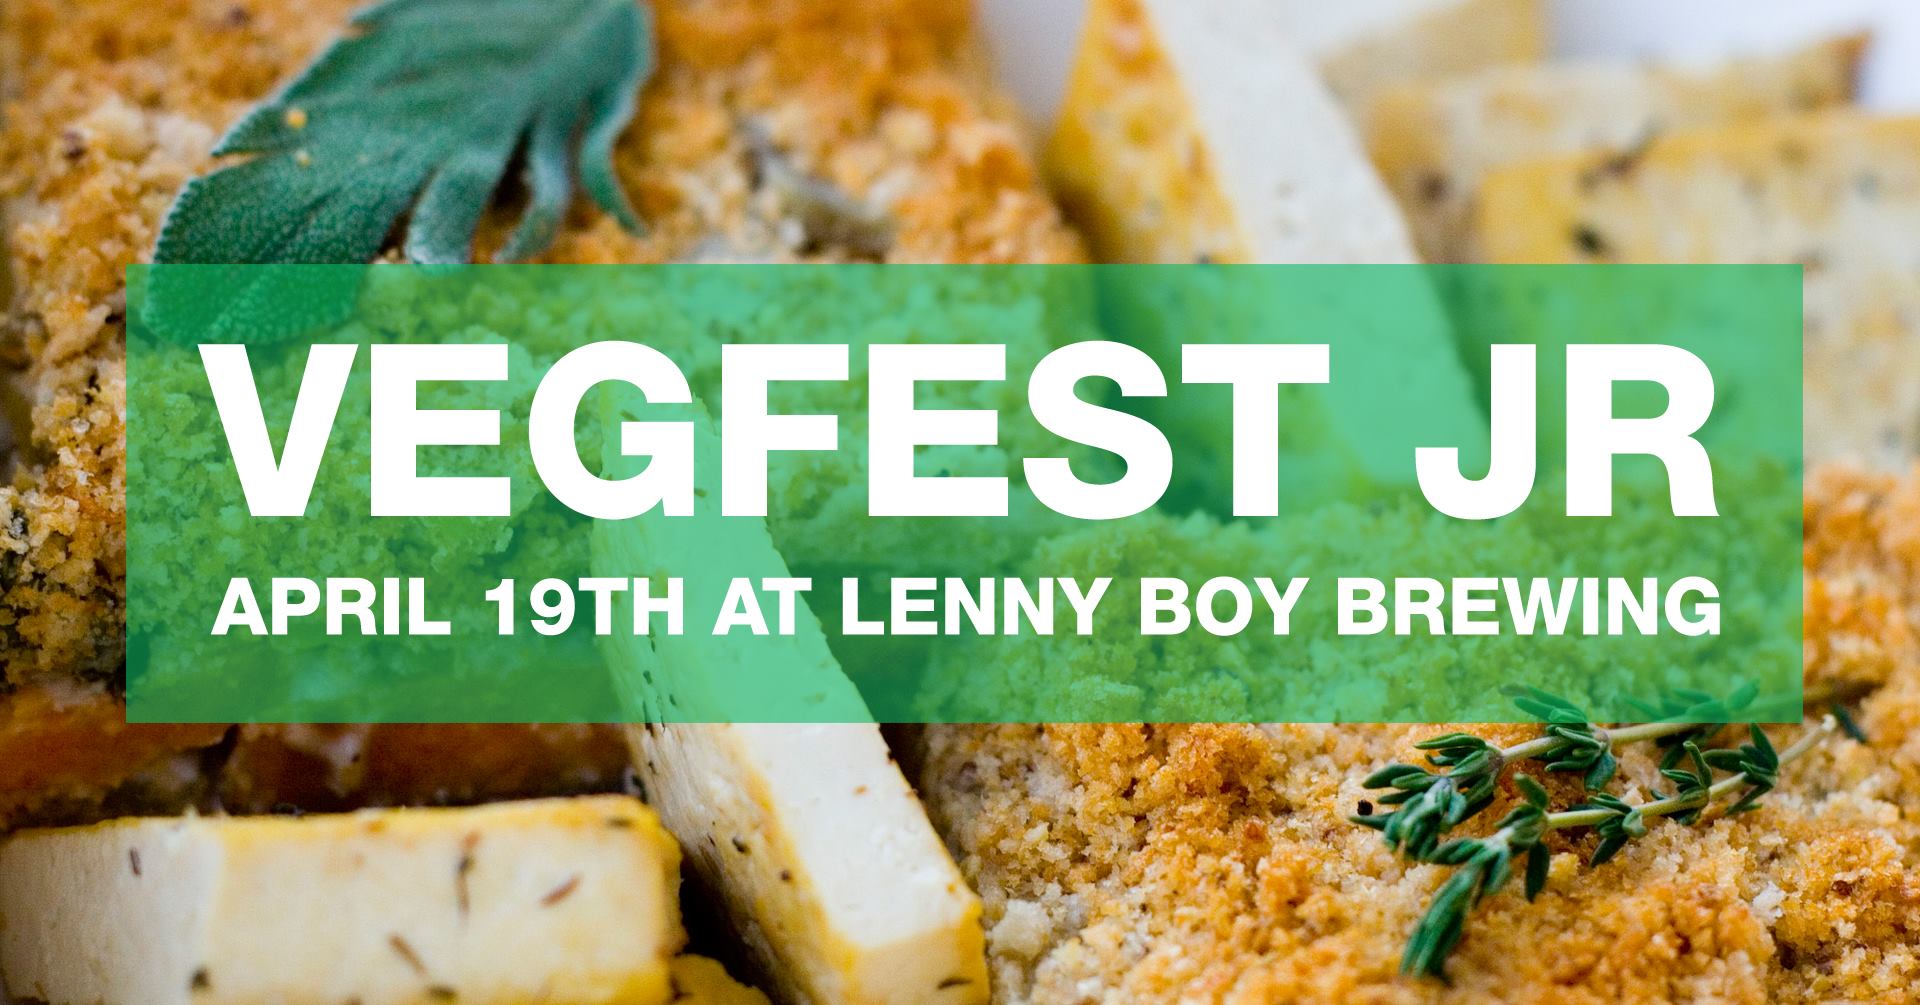 Join us at VegFest Jr. on April 19th!